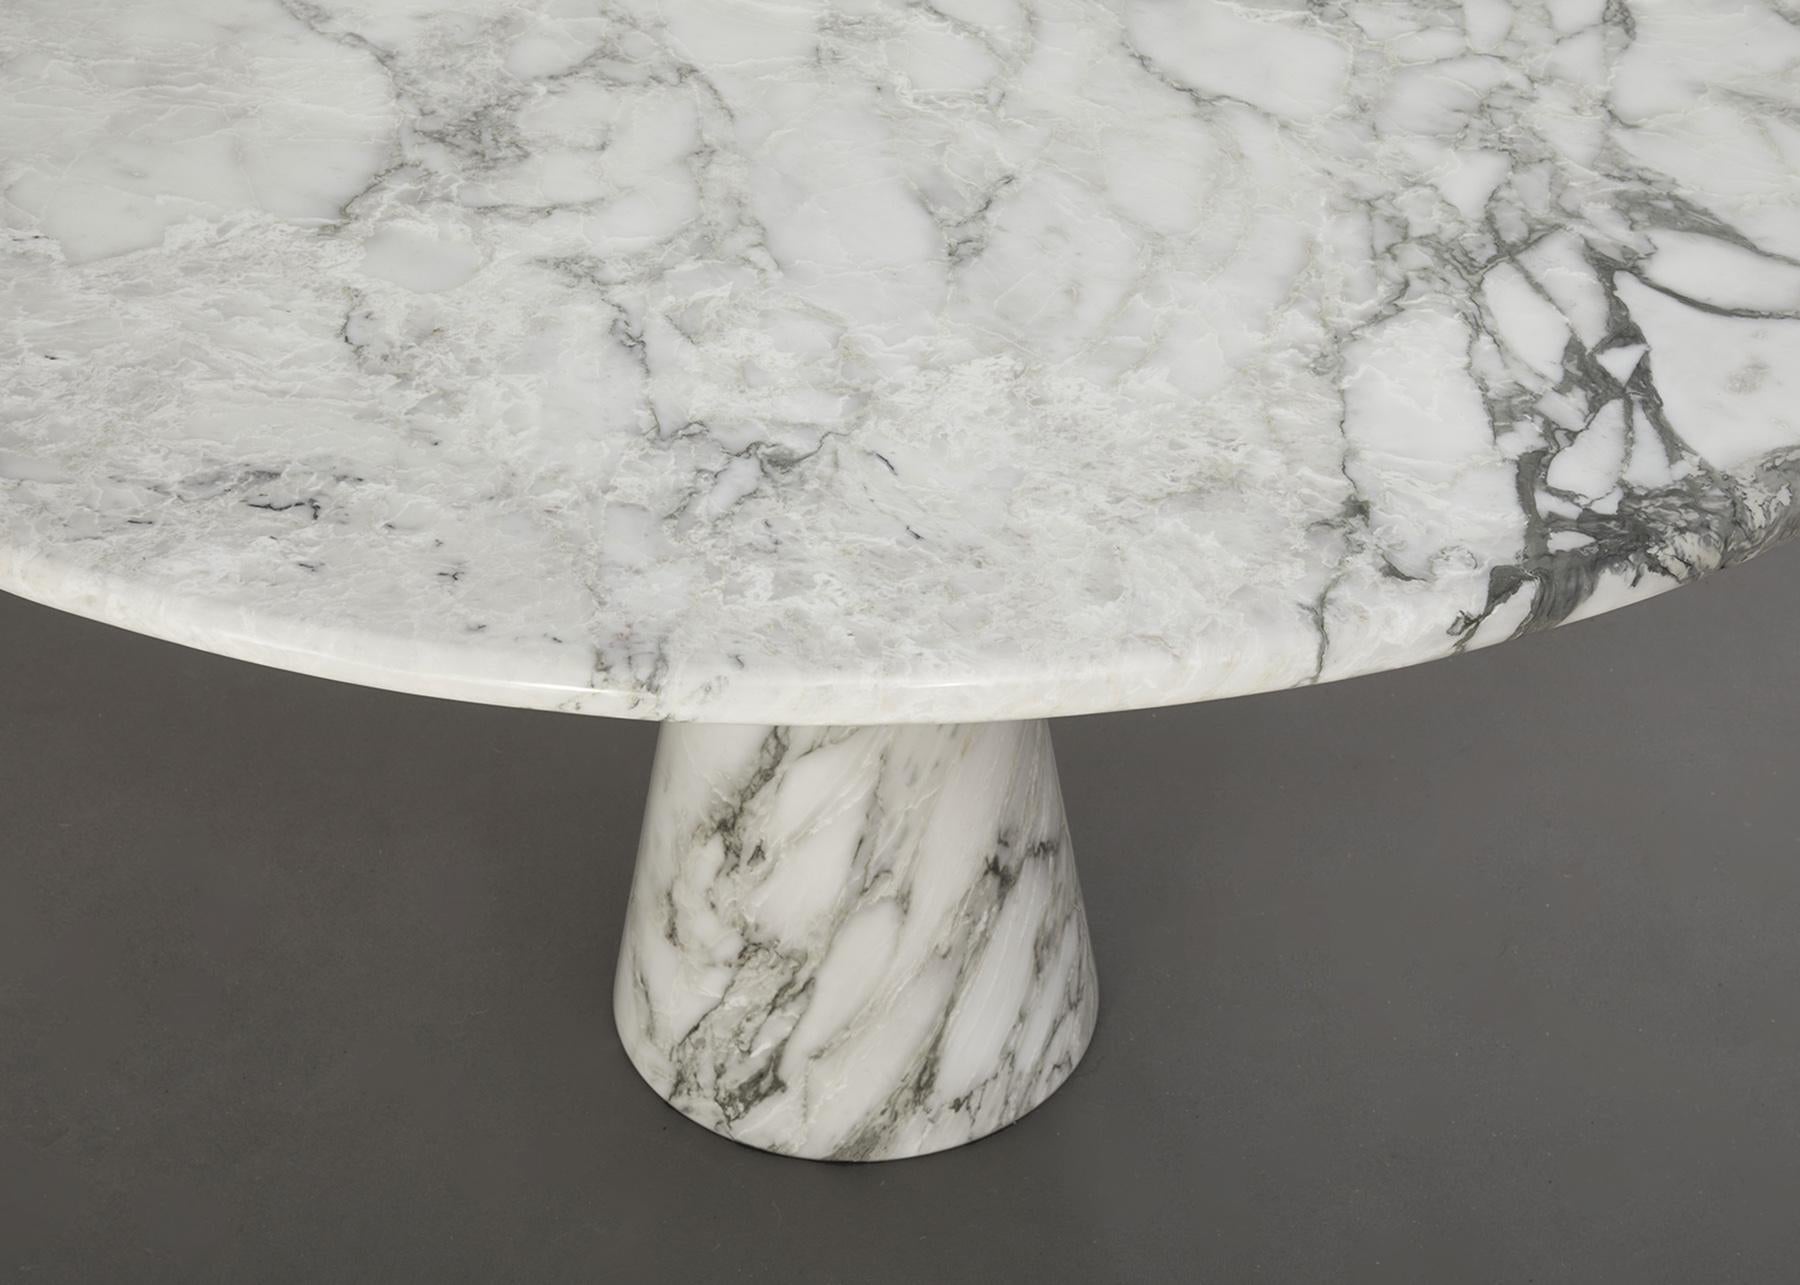 Mid-Century Modern Angelo Mangiarotti M1 Dining Table, for Skipper, Arabescato Marble, Italy 1969